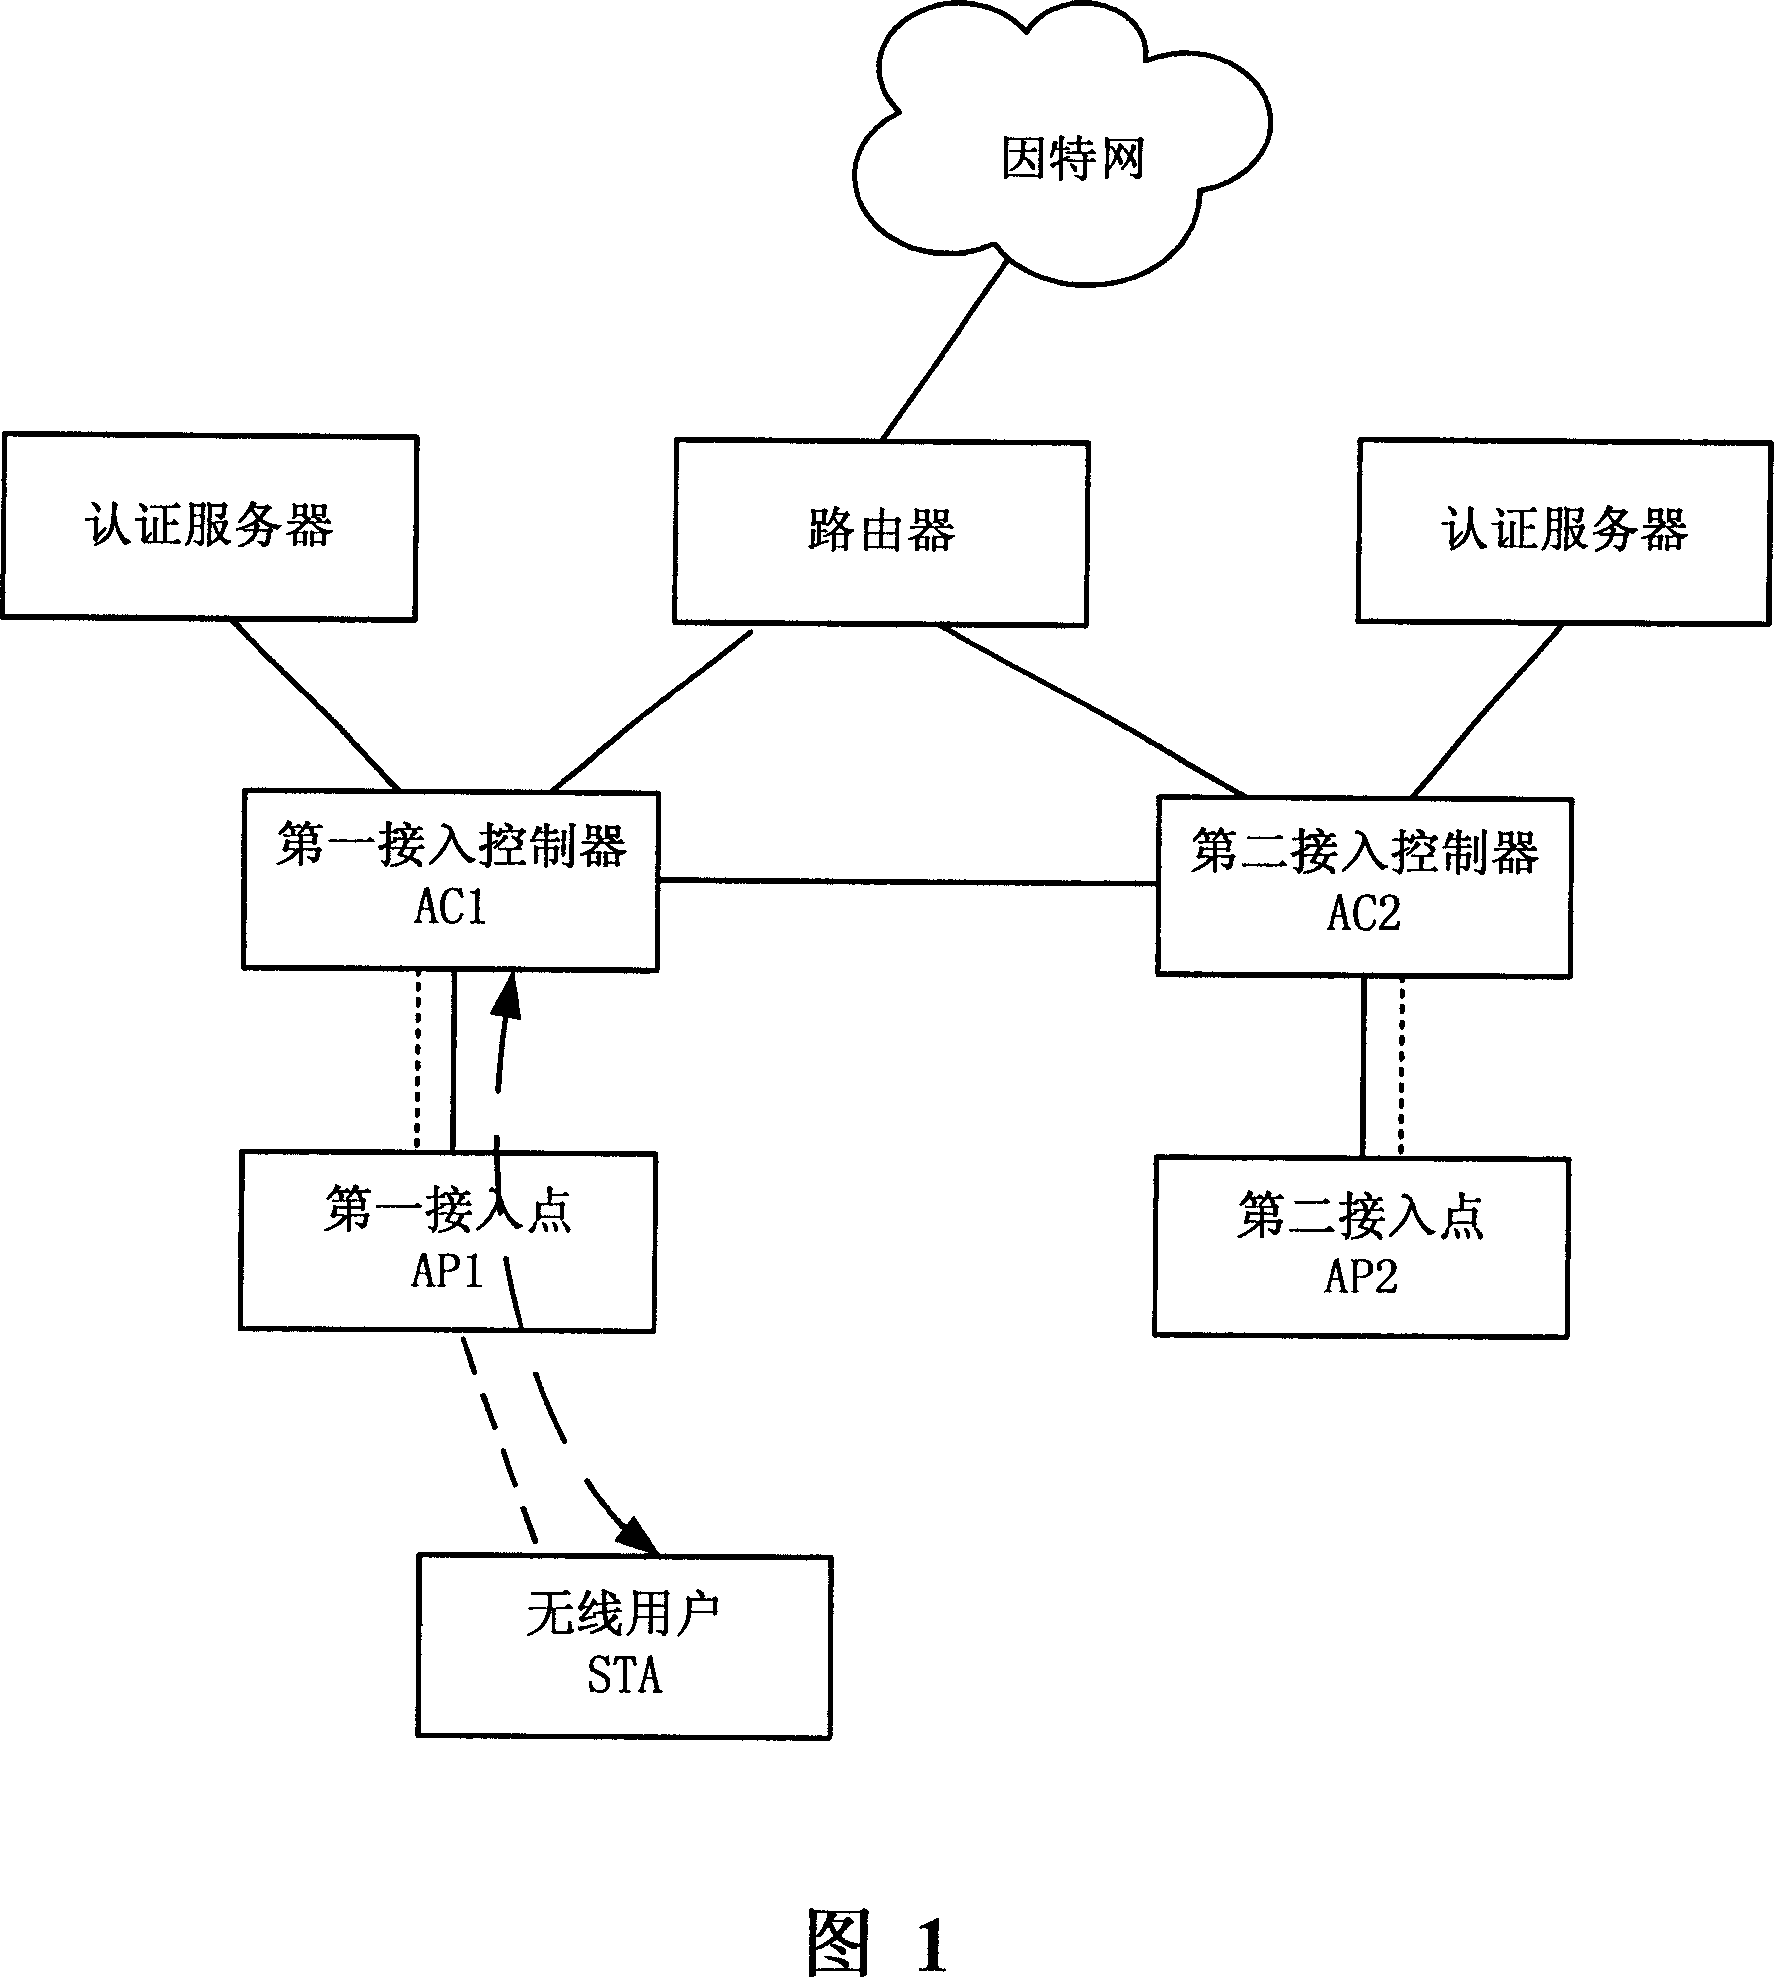 Method for wireless user inserting network service, inserting controller and server